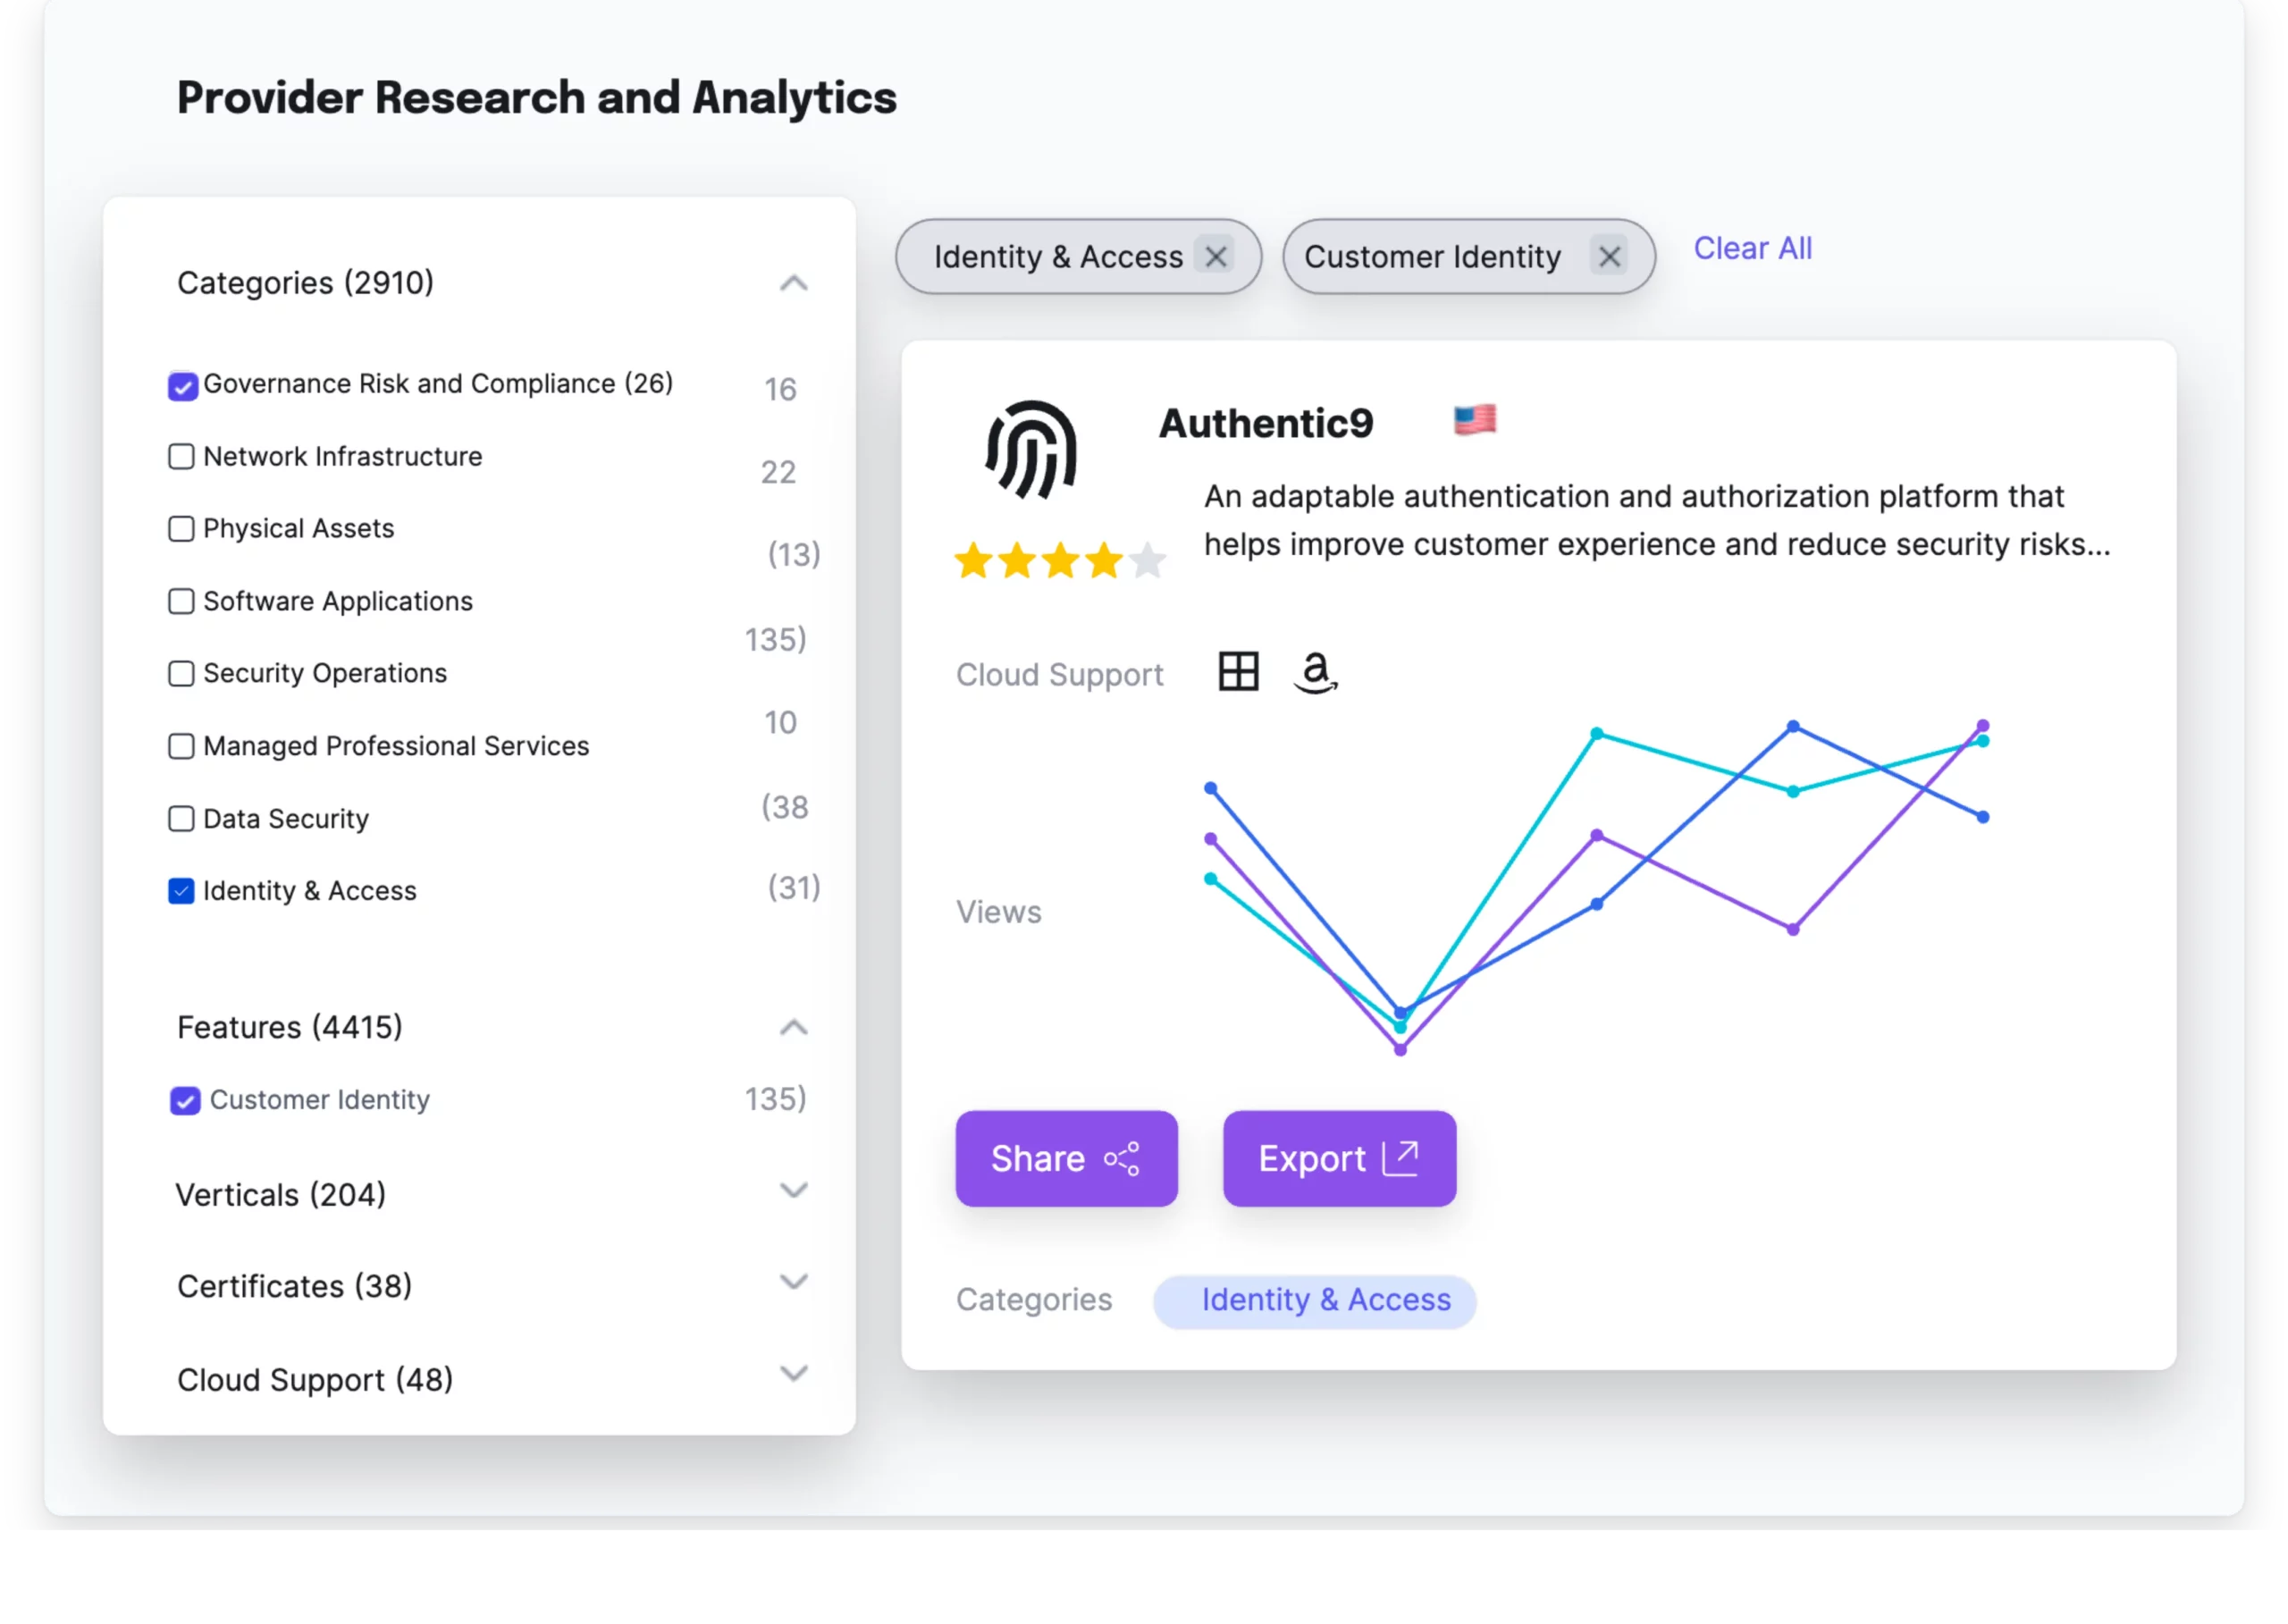 Seller Provider Research Analytics